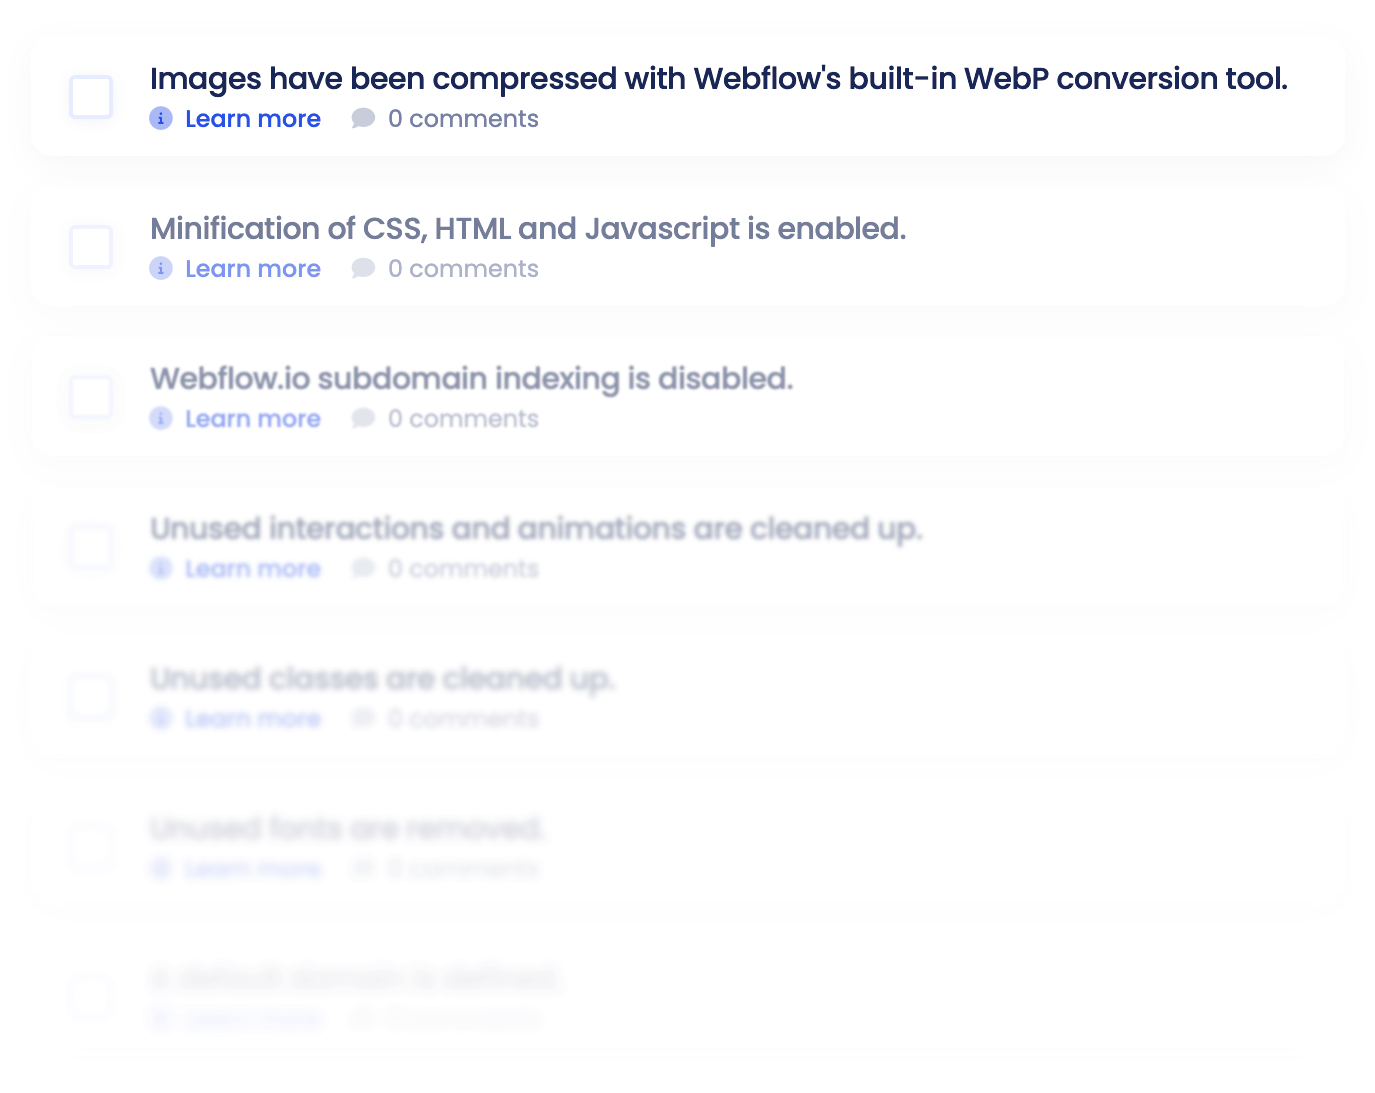 Preview of the new Webflow section in Koalati's checklist, with tasks such as: "Images have been compressed with Webflow's built-in WebP conversion tool.", "Minification of CSS, HTML and Javascript is enabled", "Webflow.io subdomain indexing is disabled.", "Unused interactions and animations are cleaned up.", "Unused classes are cleaned up", and more.